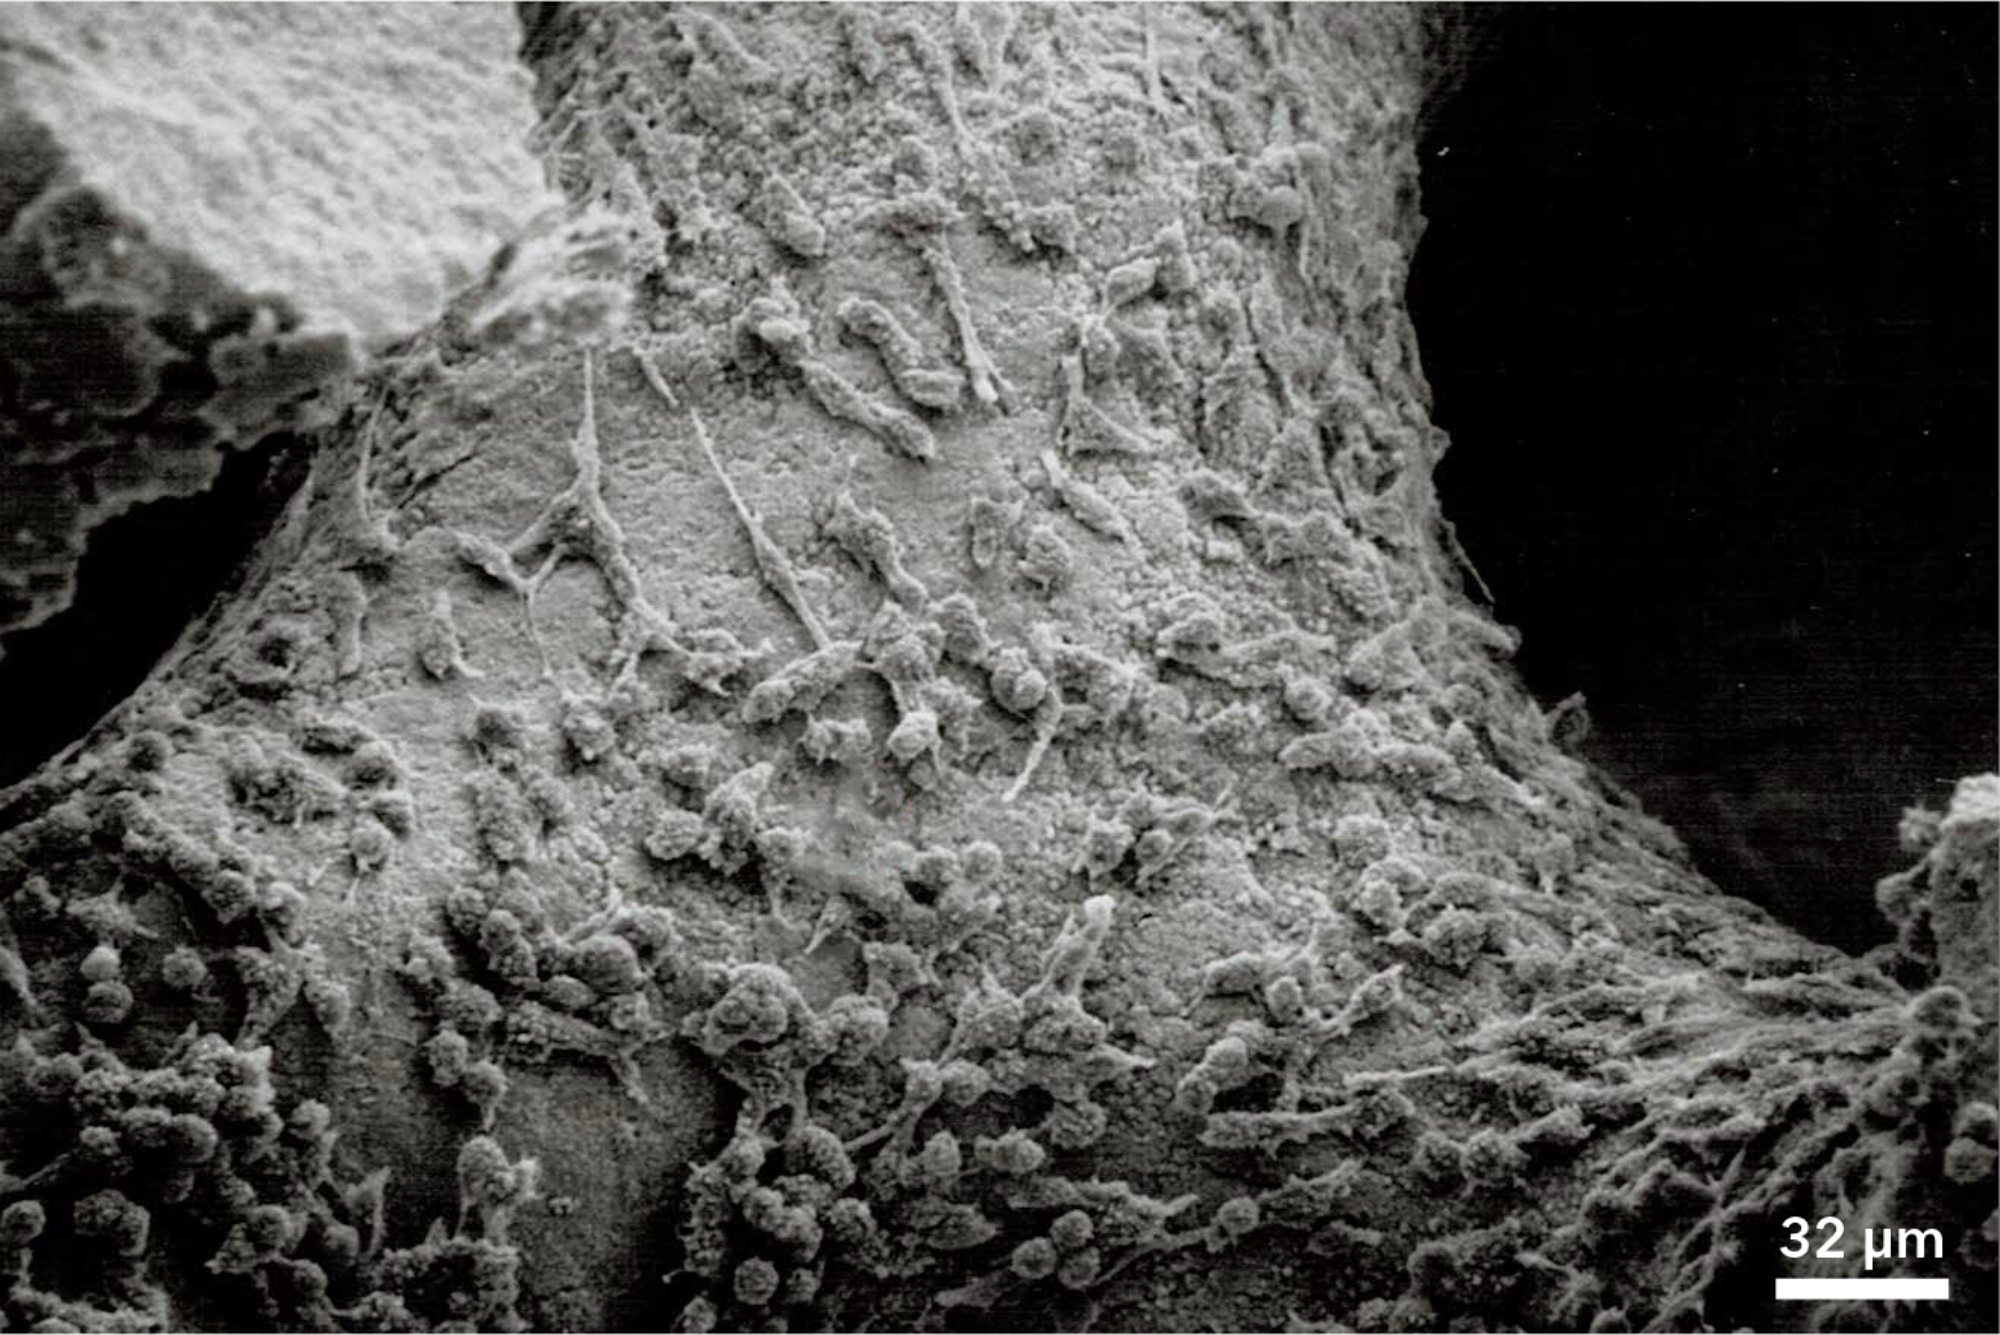 Cells growing on surface of Biogennix's biologically active synthetic bone graft material.